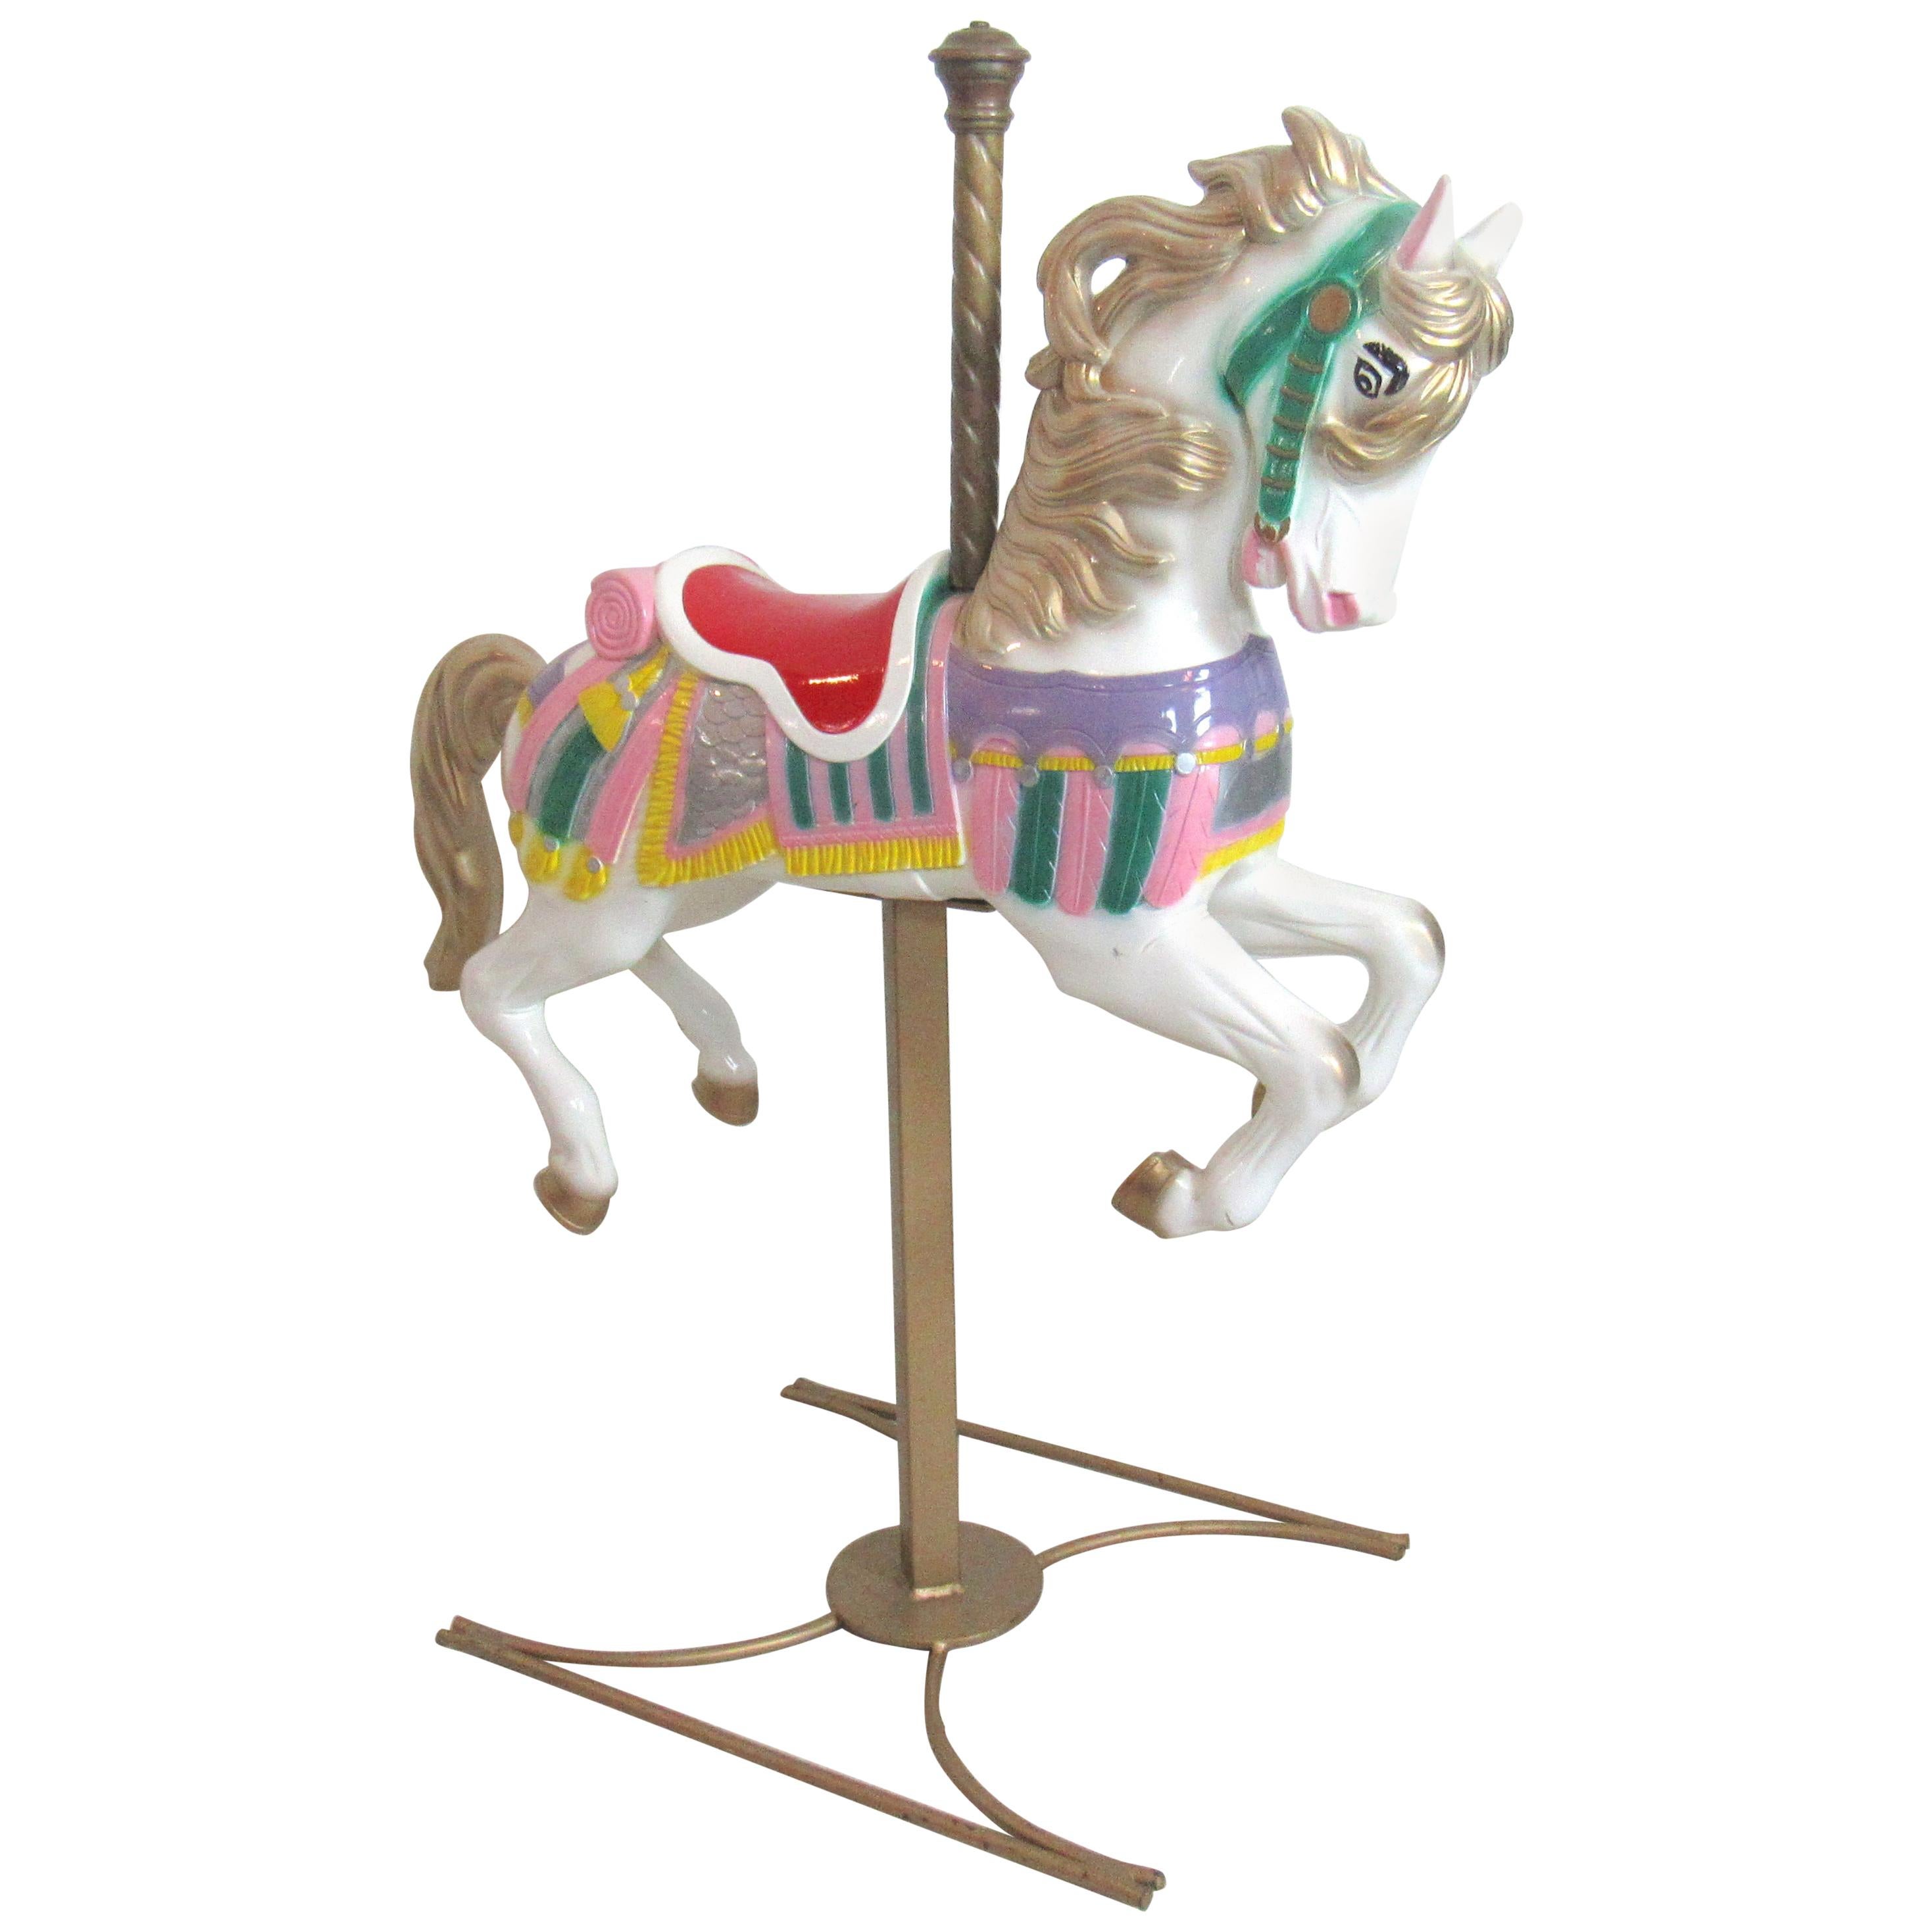 Vintage Carousel Horse At 1stdibs, Carousel Horse Table Lamps For Living Room